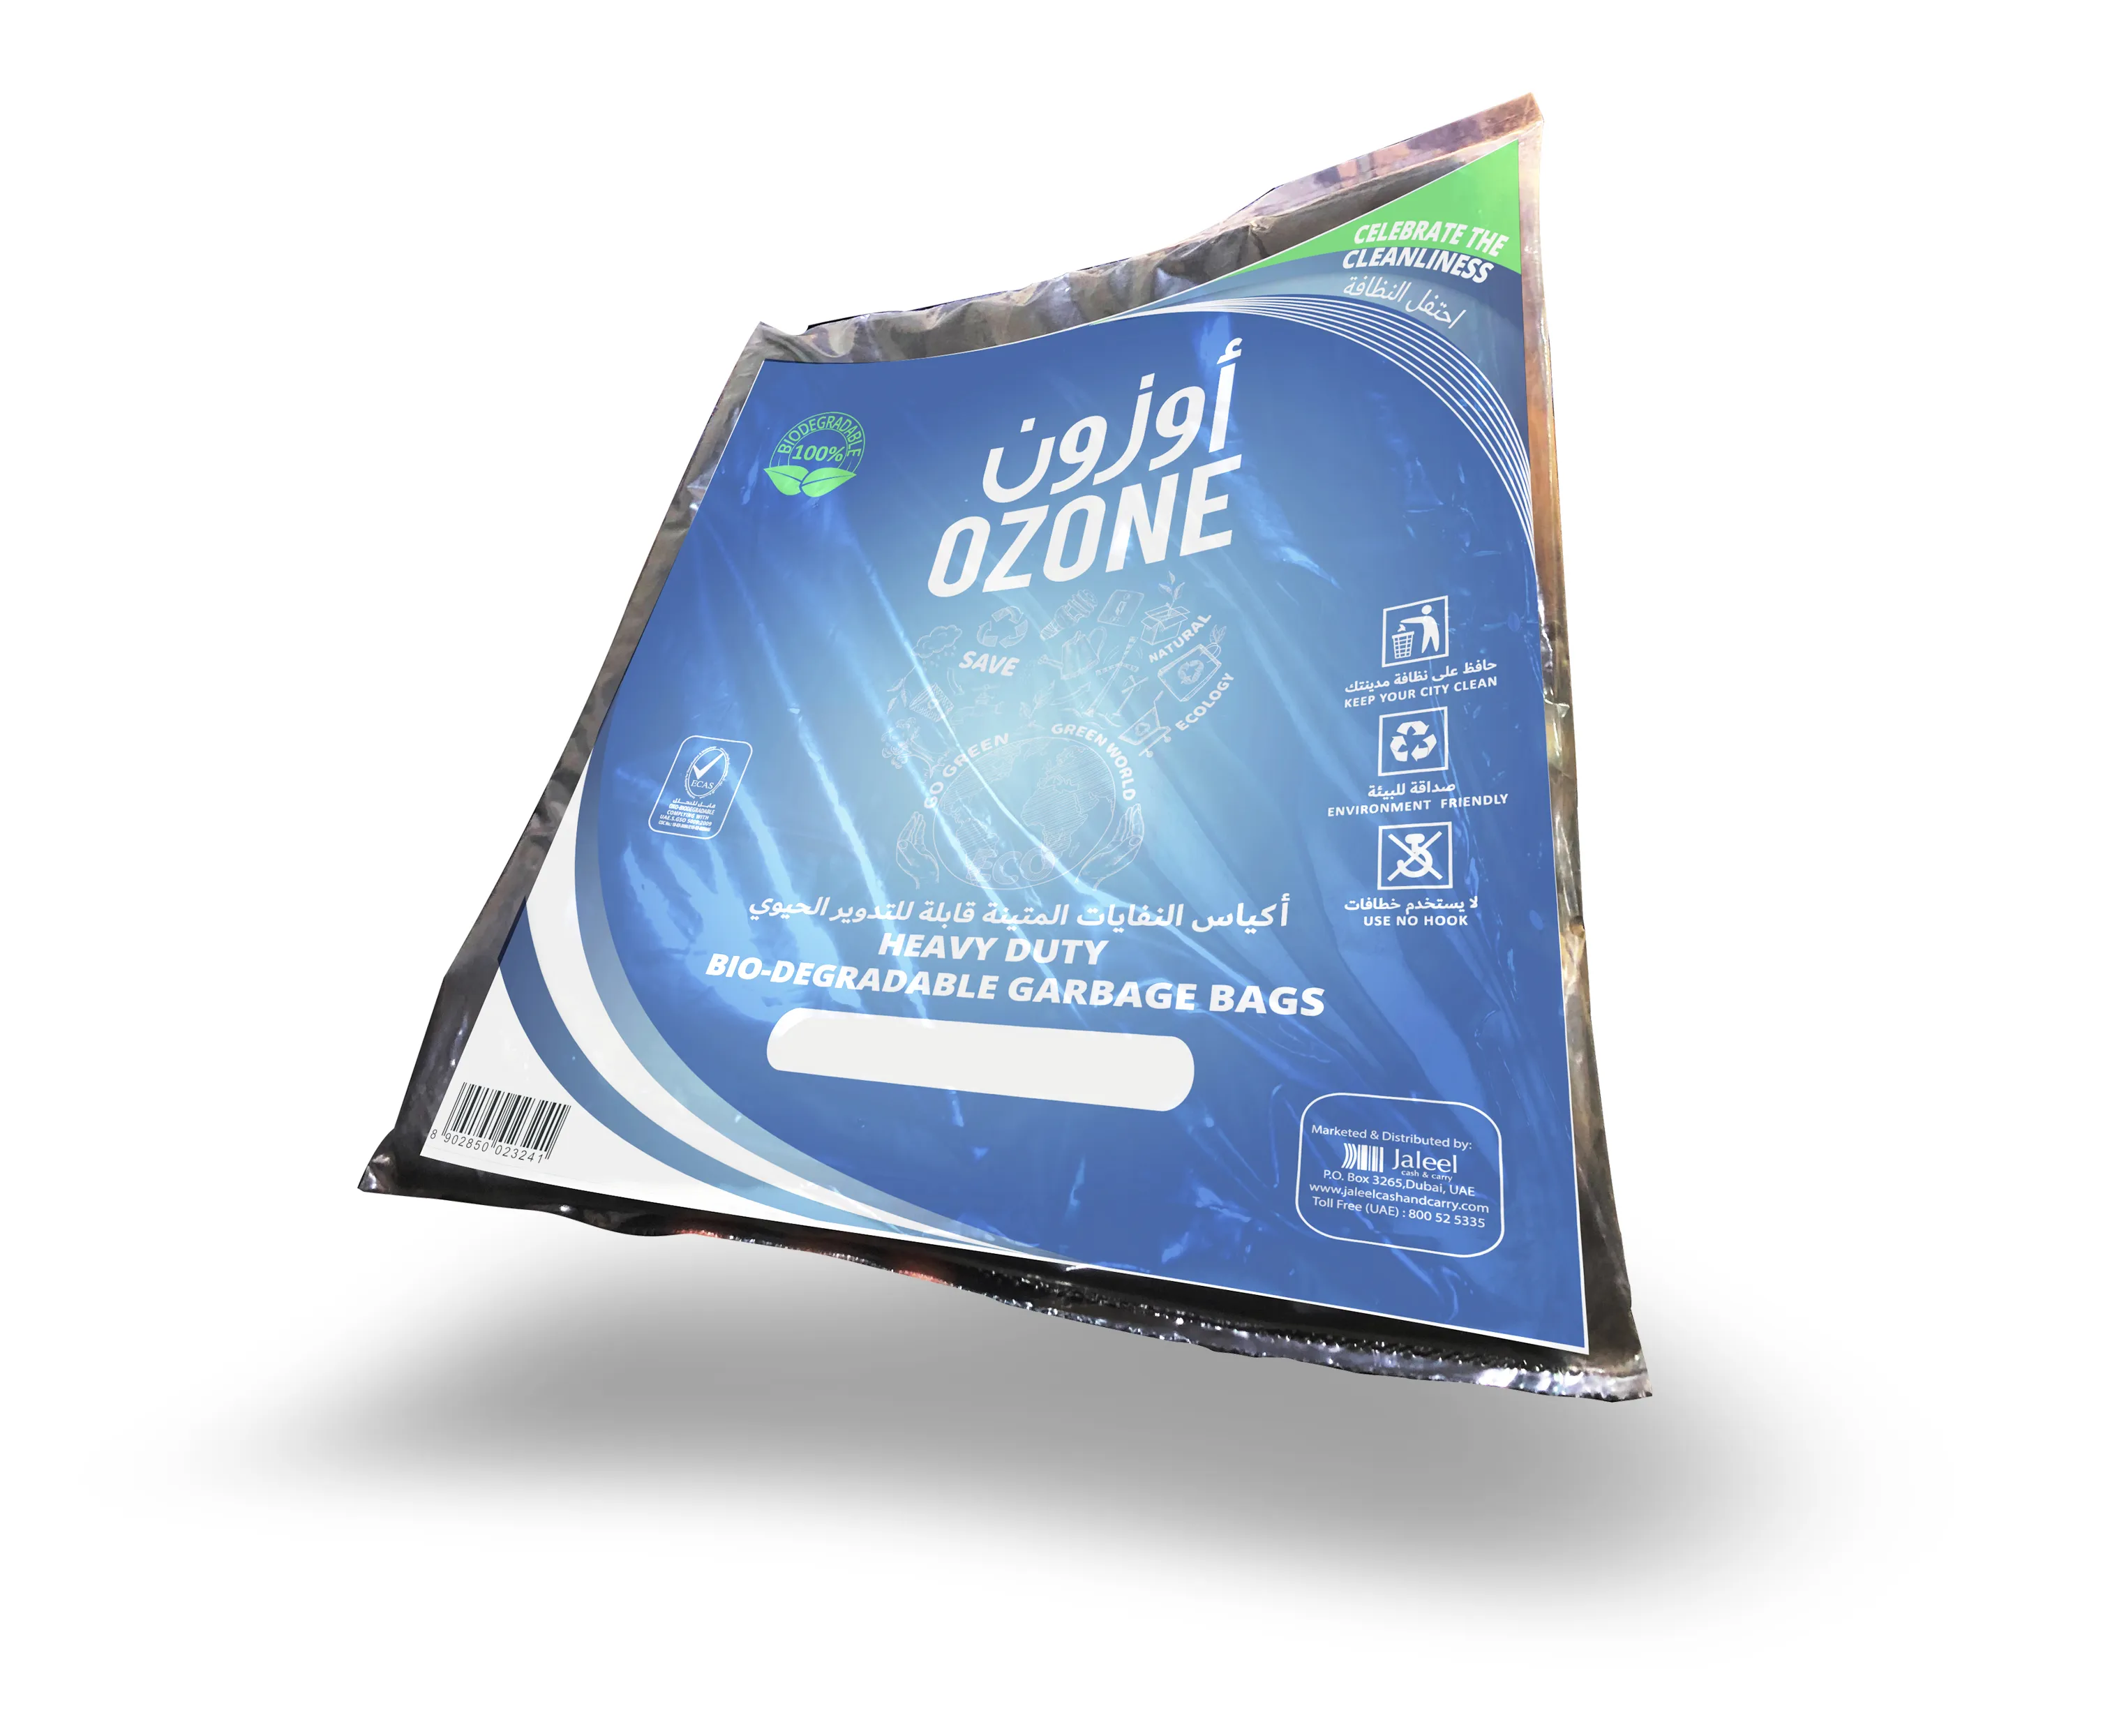 Ozone Garbage Bags, 105 x 125cm, 20 Pieces